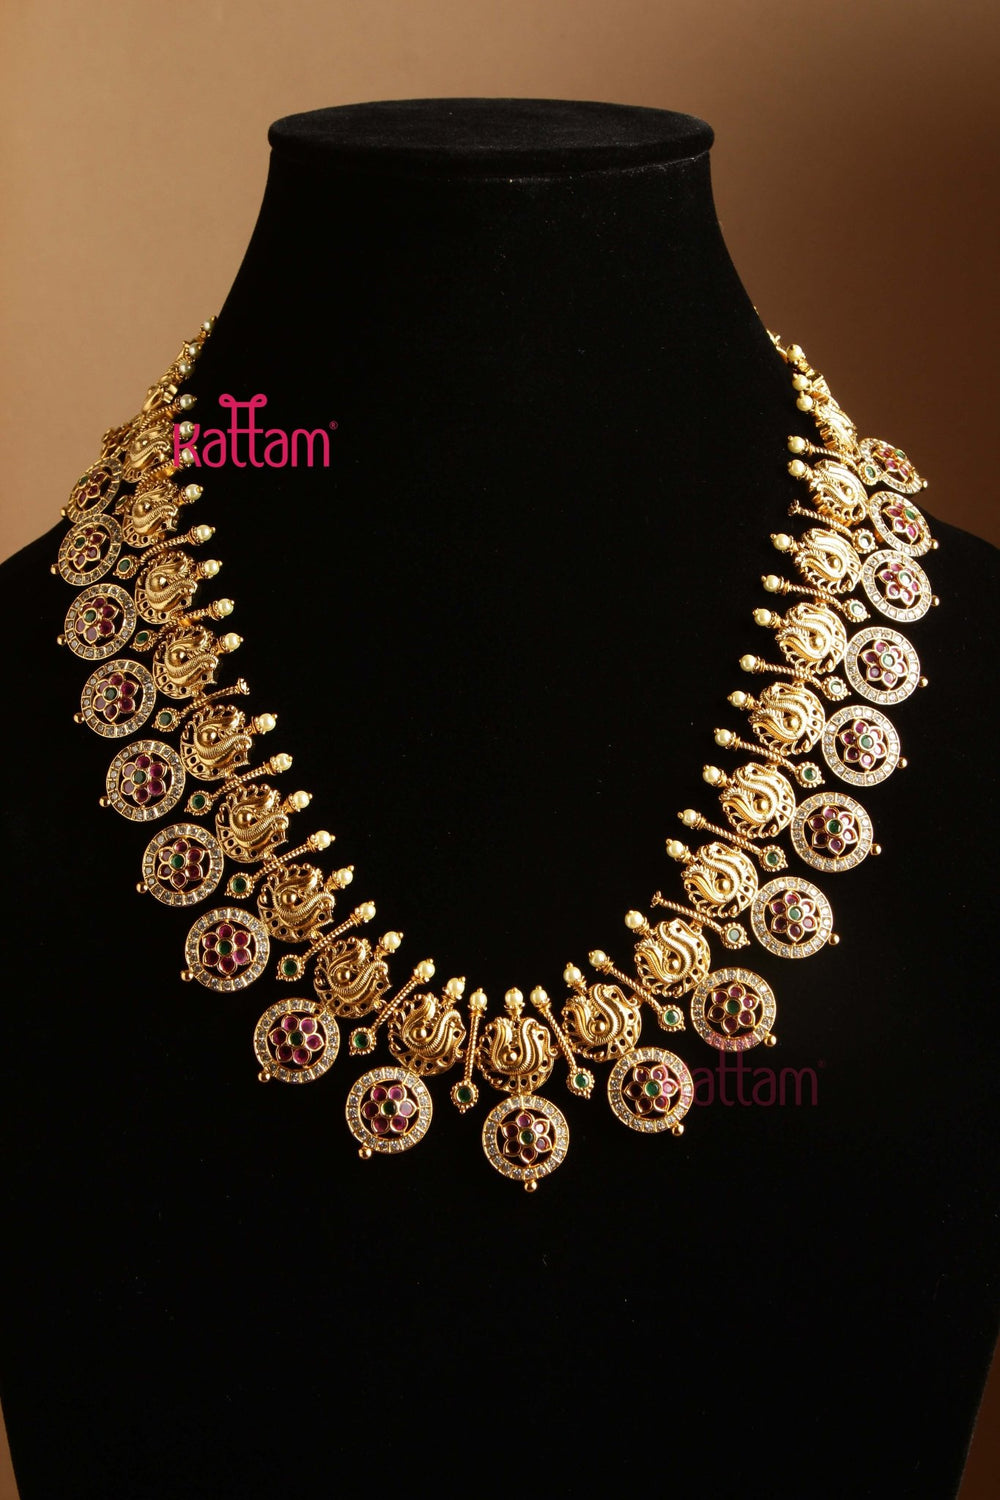 Bridal Peacock Midlength Necklace - n2872 